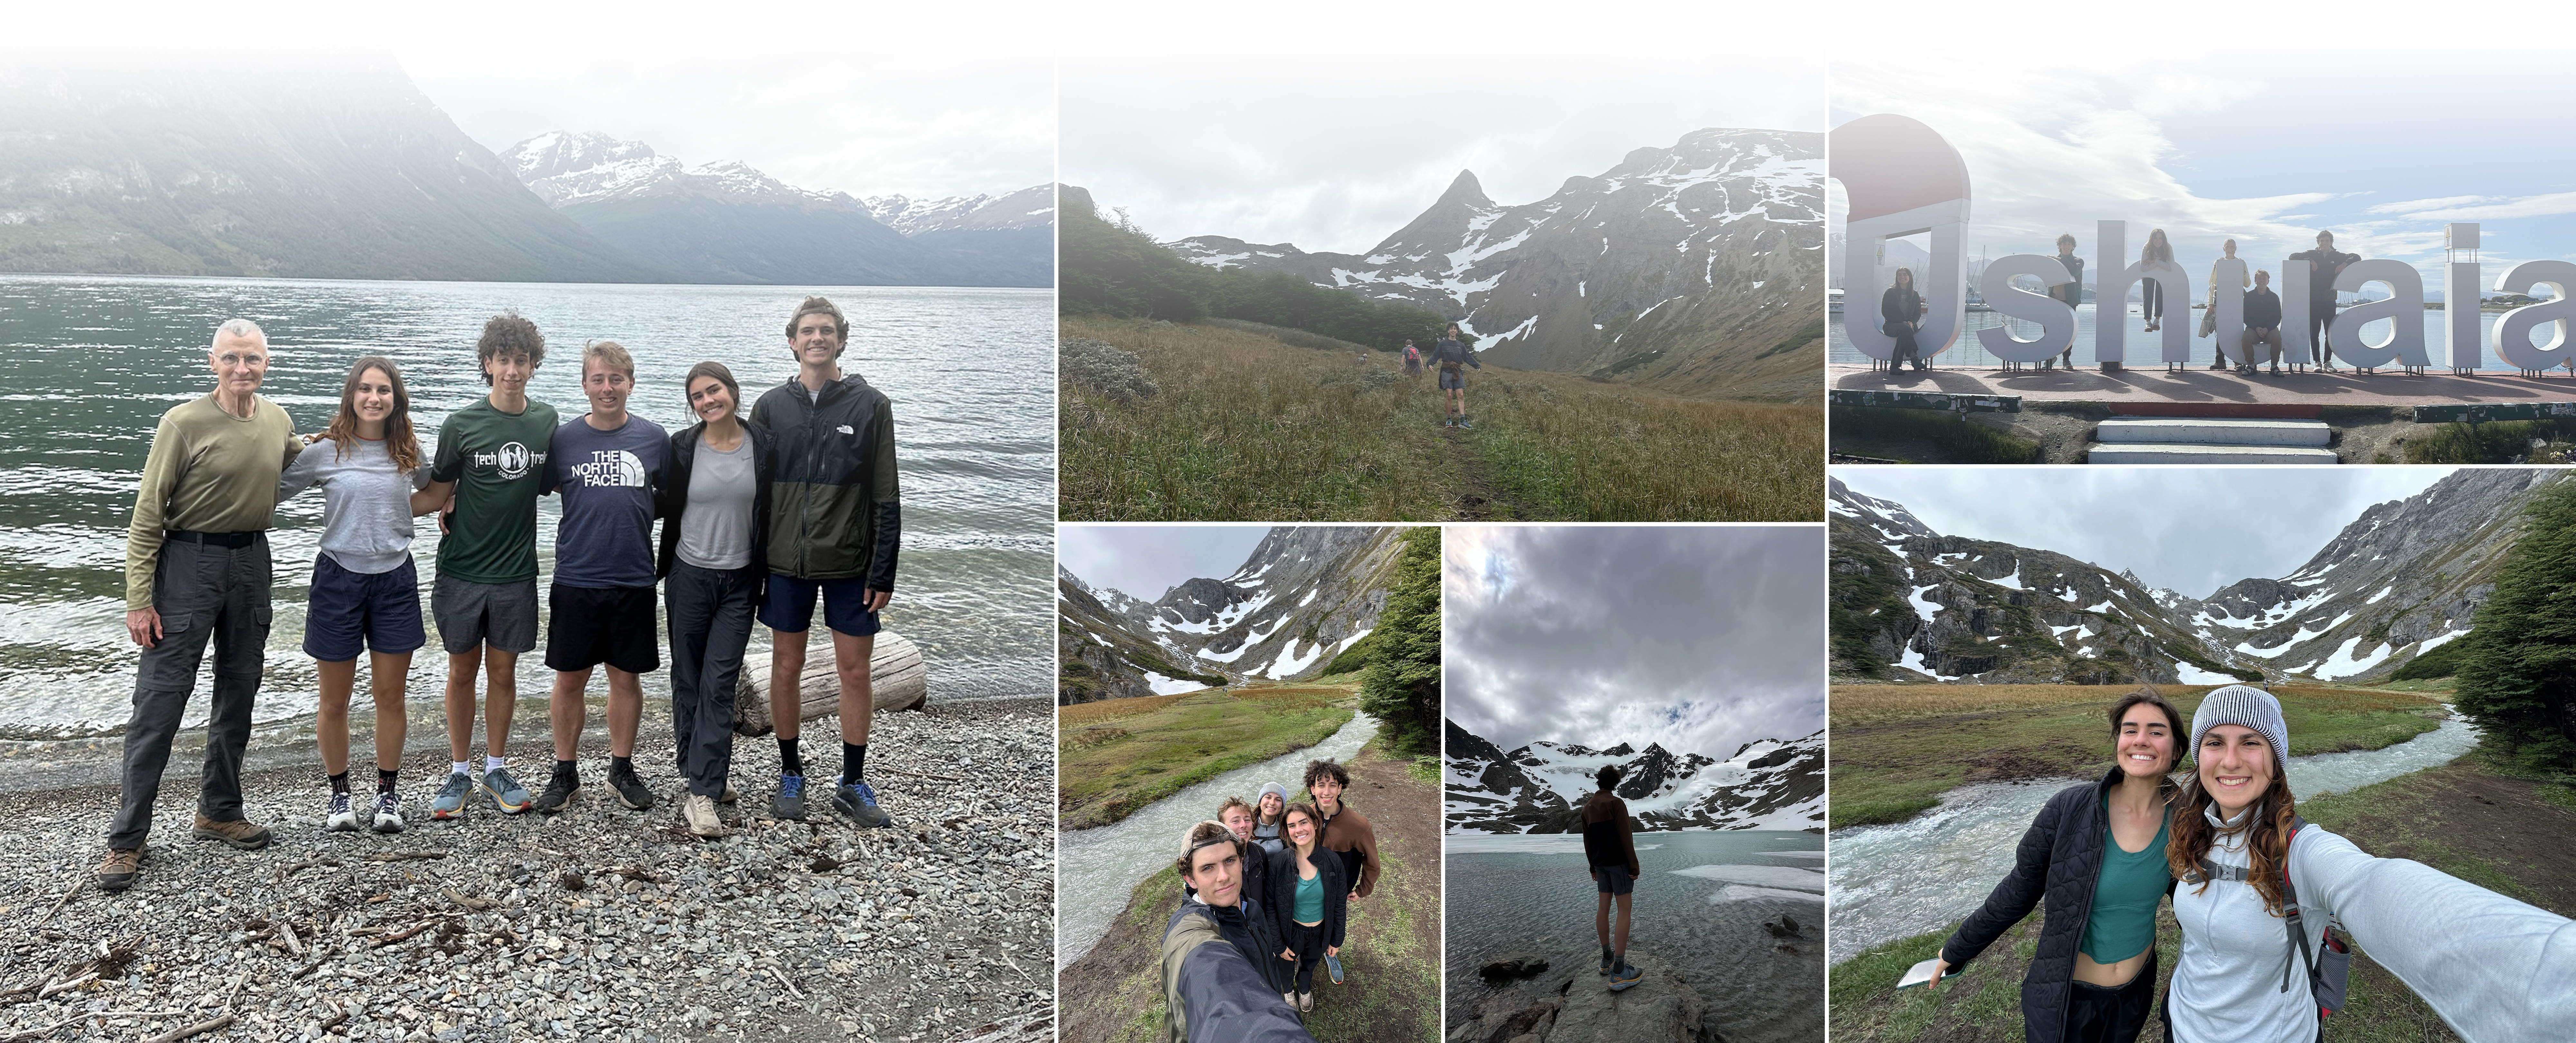 Photos of the students in Argentina. Hiking and enjoying the outdoors.